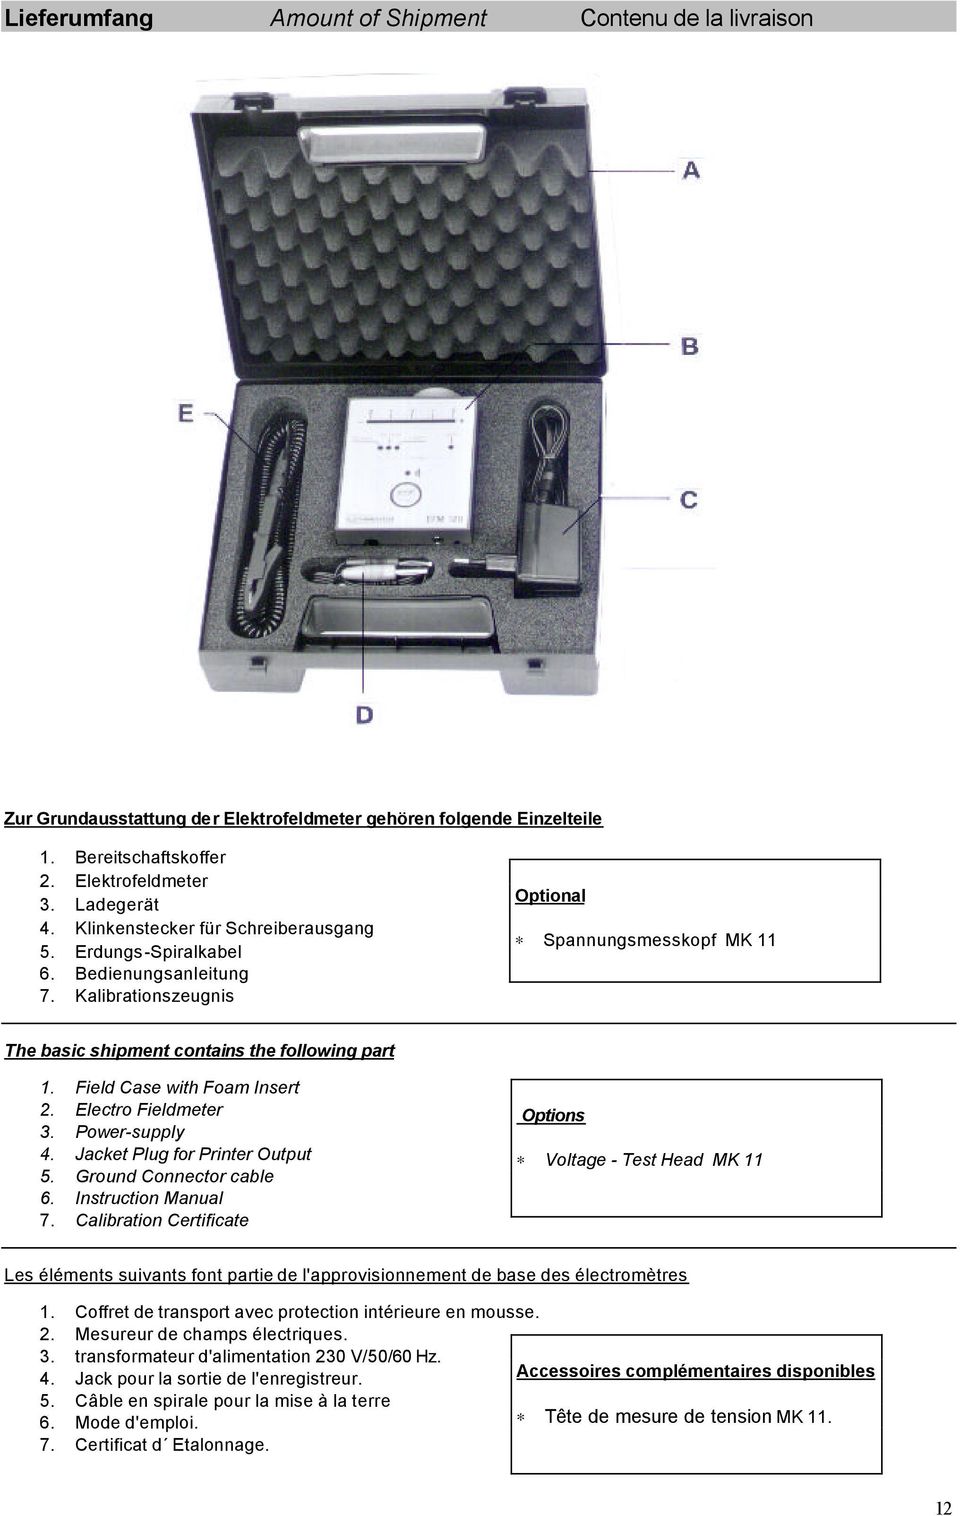 Field Case with Foam Insert 2. Electro Fieldmeter 3. Power-supply 4. Jacket Plug for Printer Output 5. Ground Connector cable 6. Instruction Manual 7.